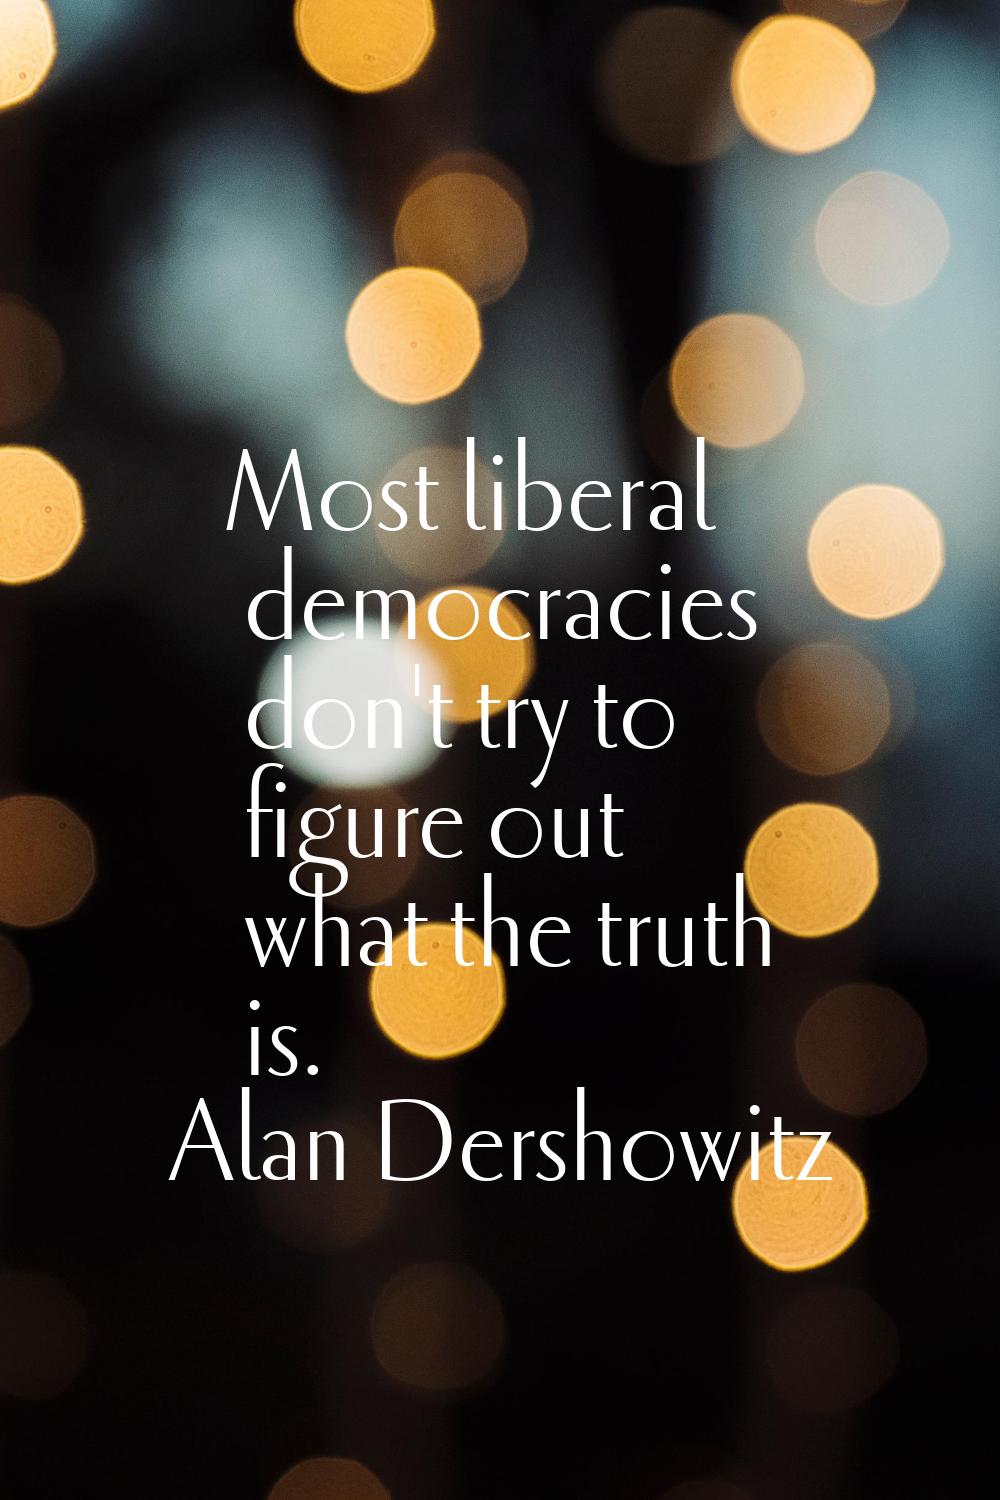 Most liberal democracies don't try to figure out what the truth is.